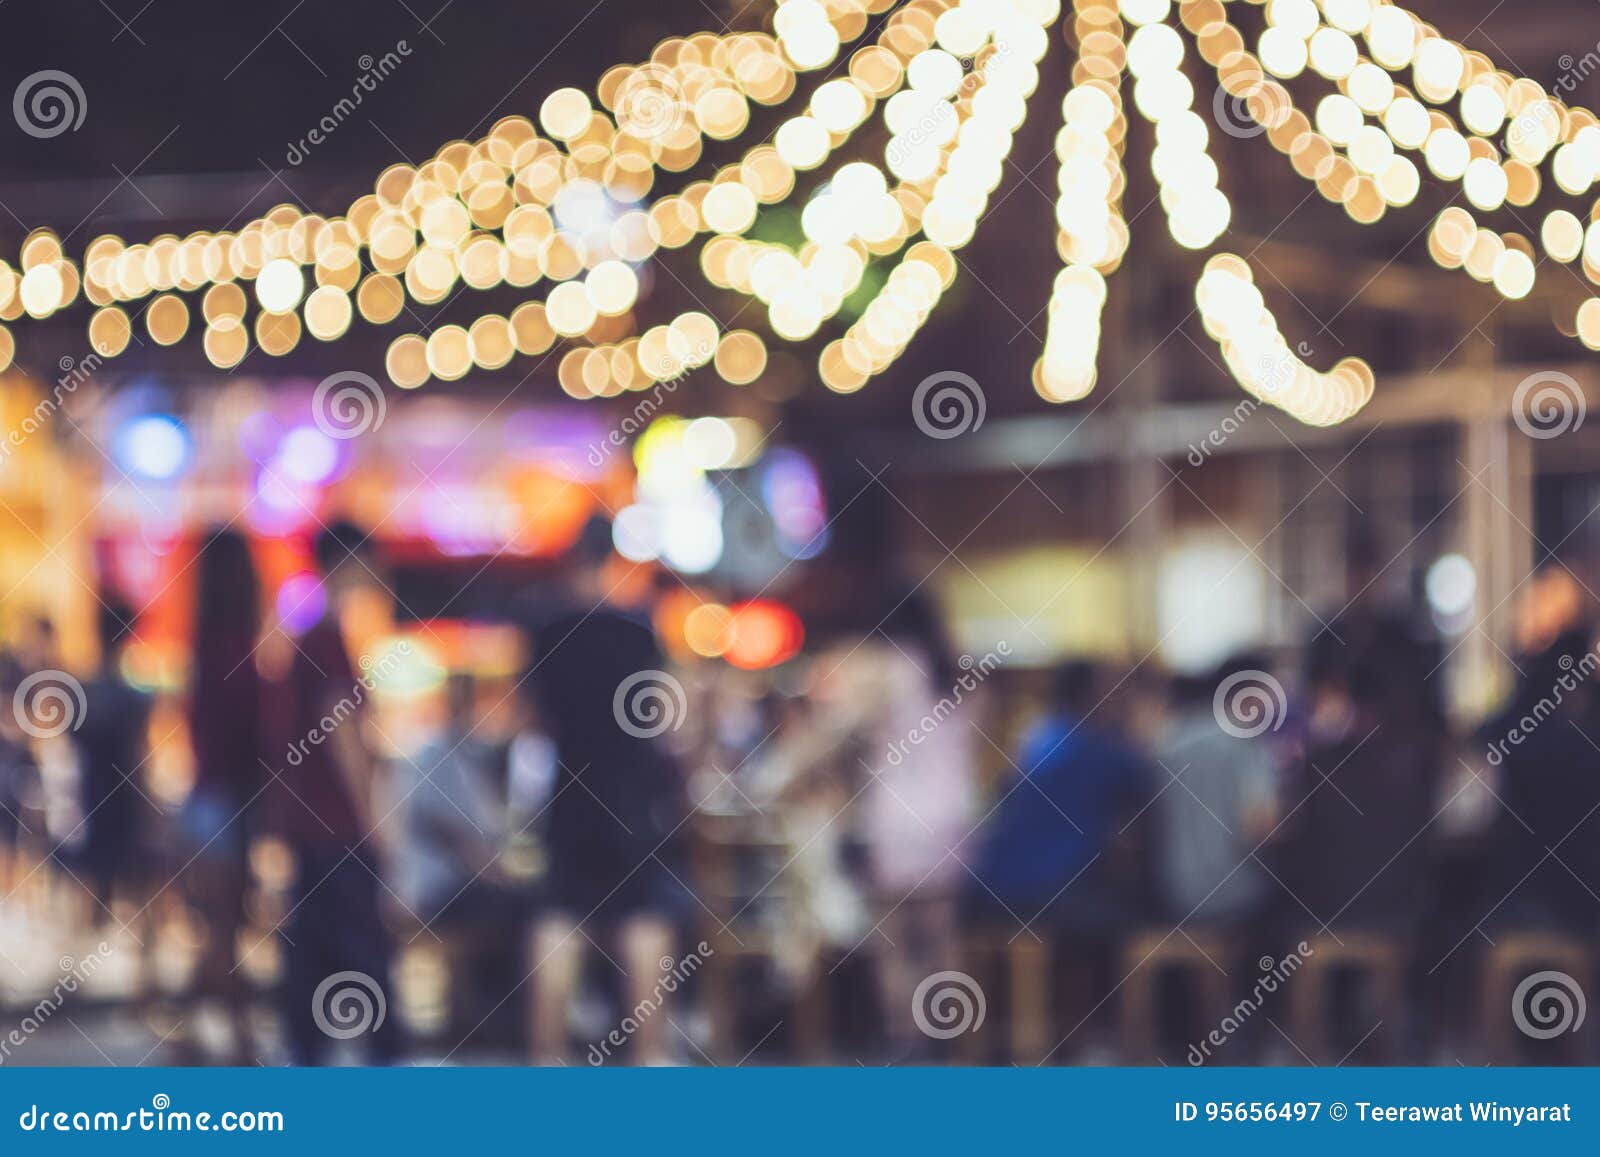 Festival Event Party Outdoor Blurred People Background Lights Stock Image -  Image of entertainment, celebration: 95656497